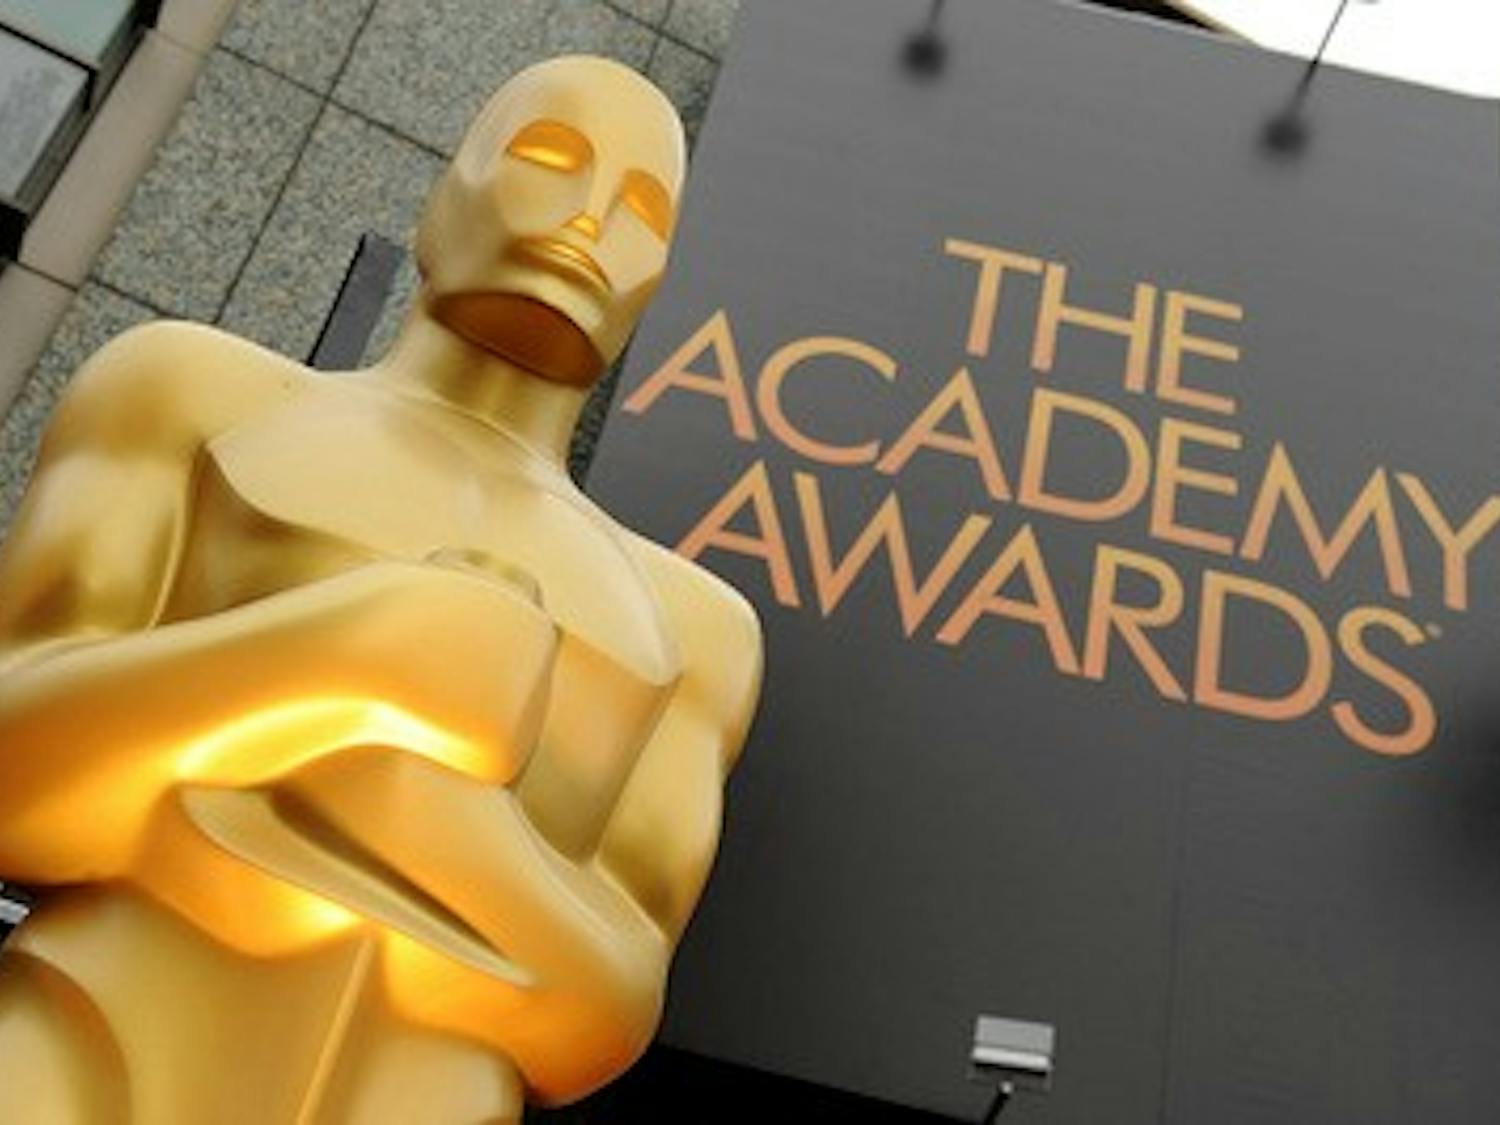 A view of an Oscar statue outside the 84th Annual Academy Awards show at the Hollywood and Highland Center in Los Angeles on February 26, 2012. (Lionel Hahn/Abaca Press/TNS)